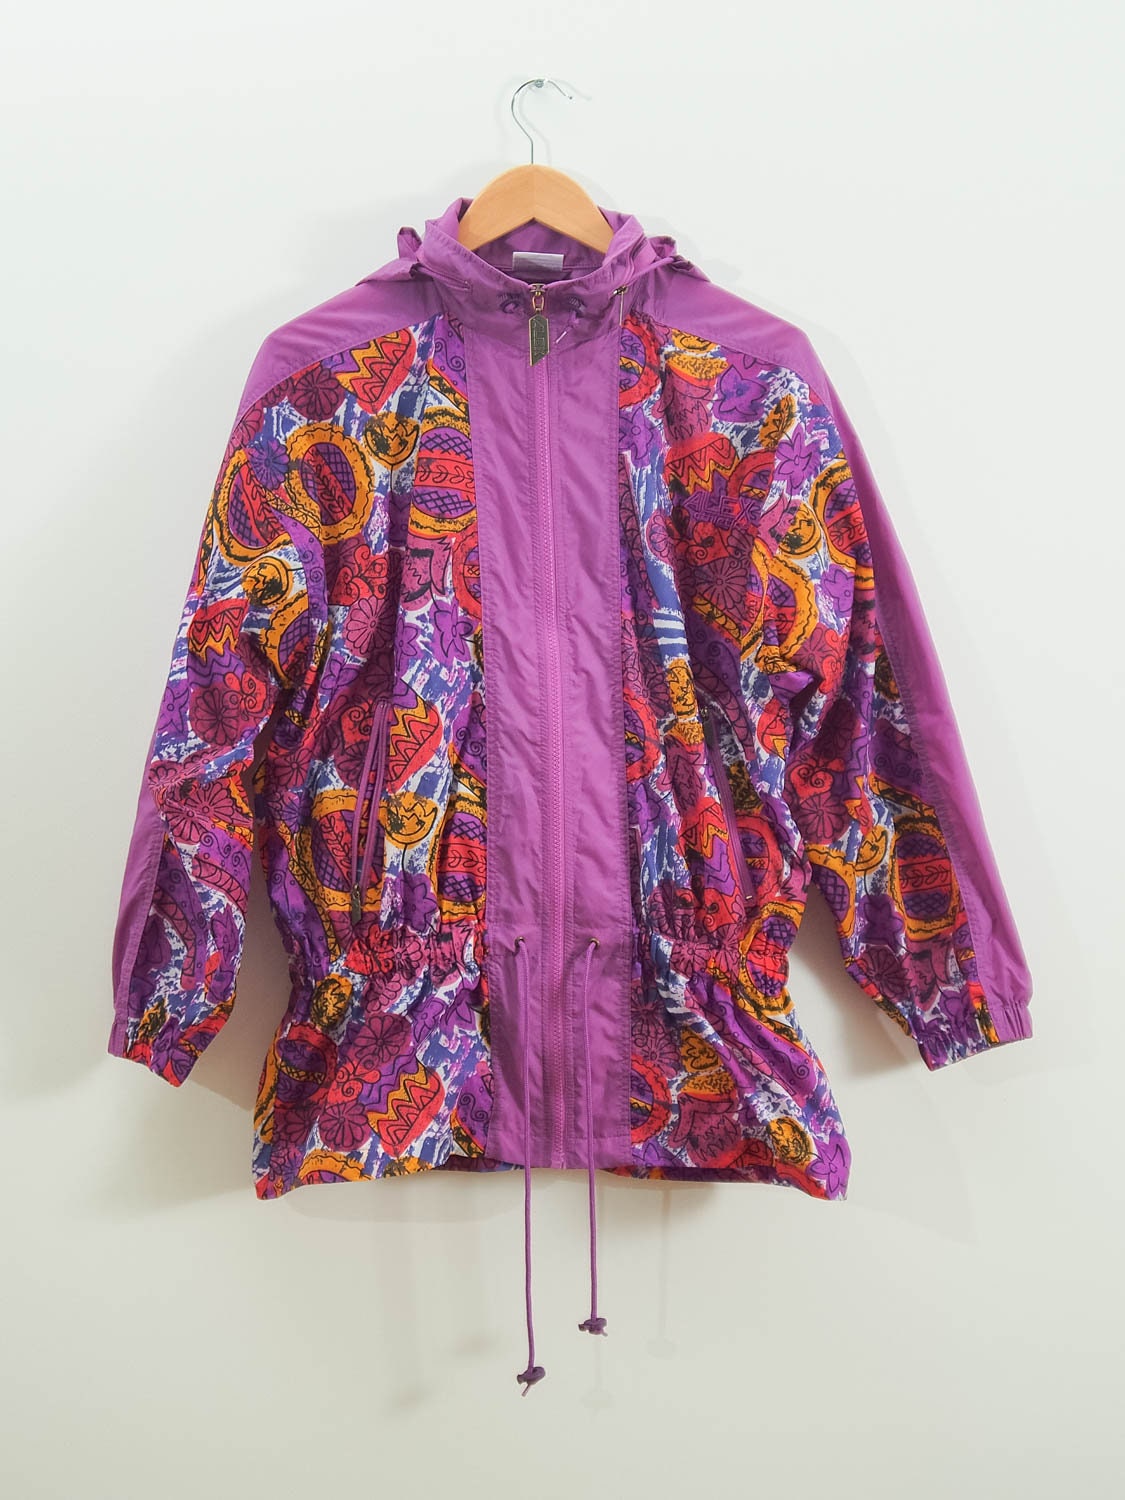 Vintage Women Windbreaker Which Packs in a Pocket/ Hipster - Etsy